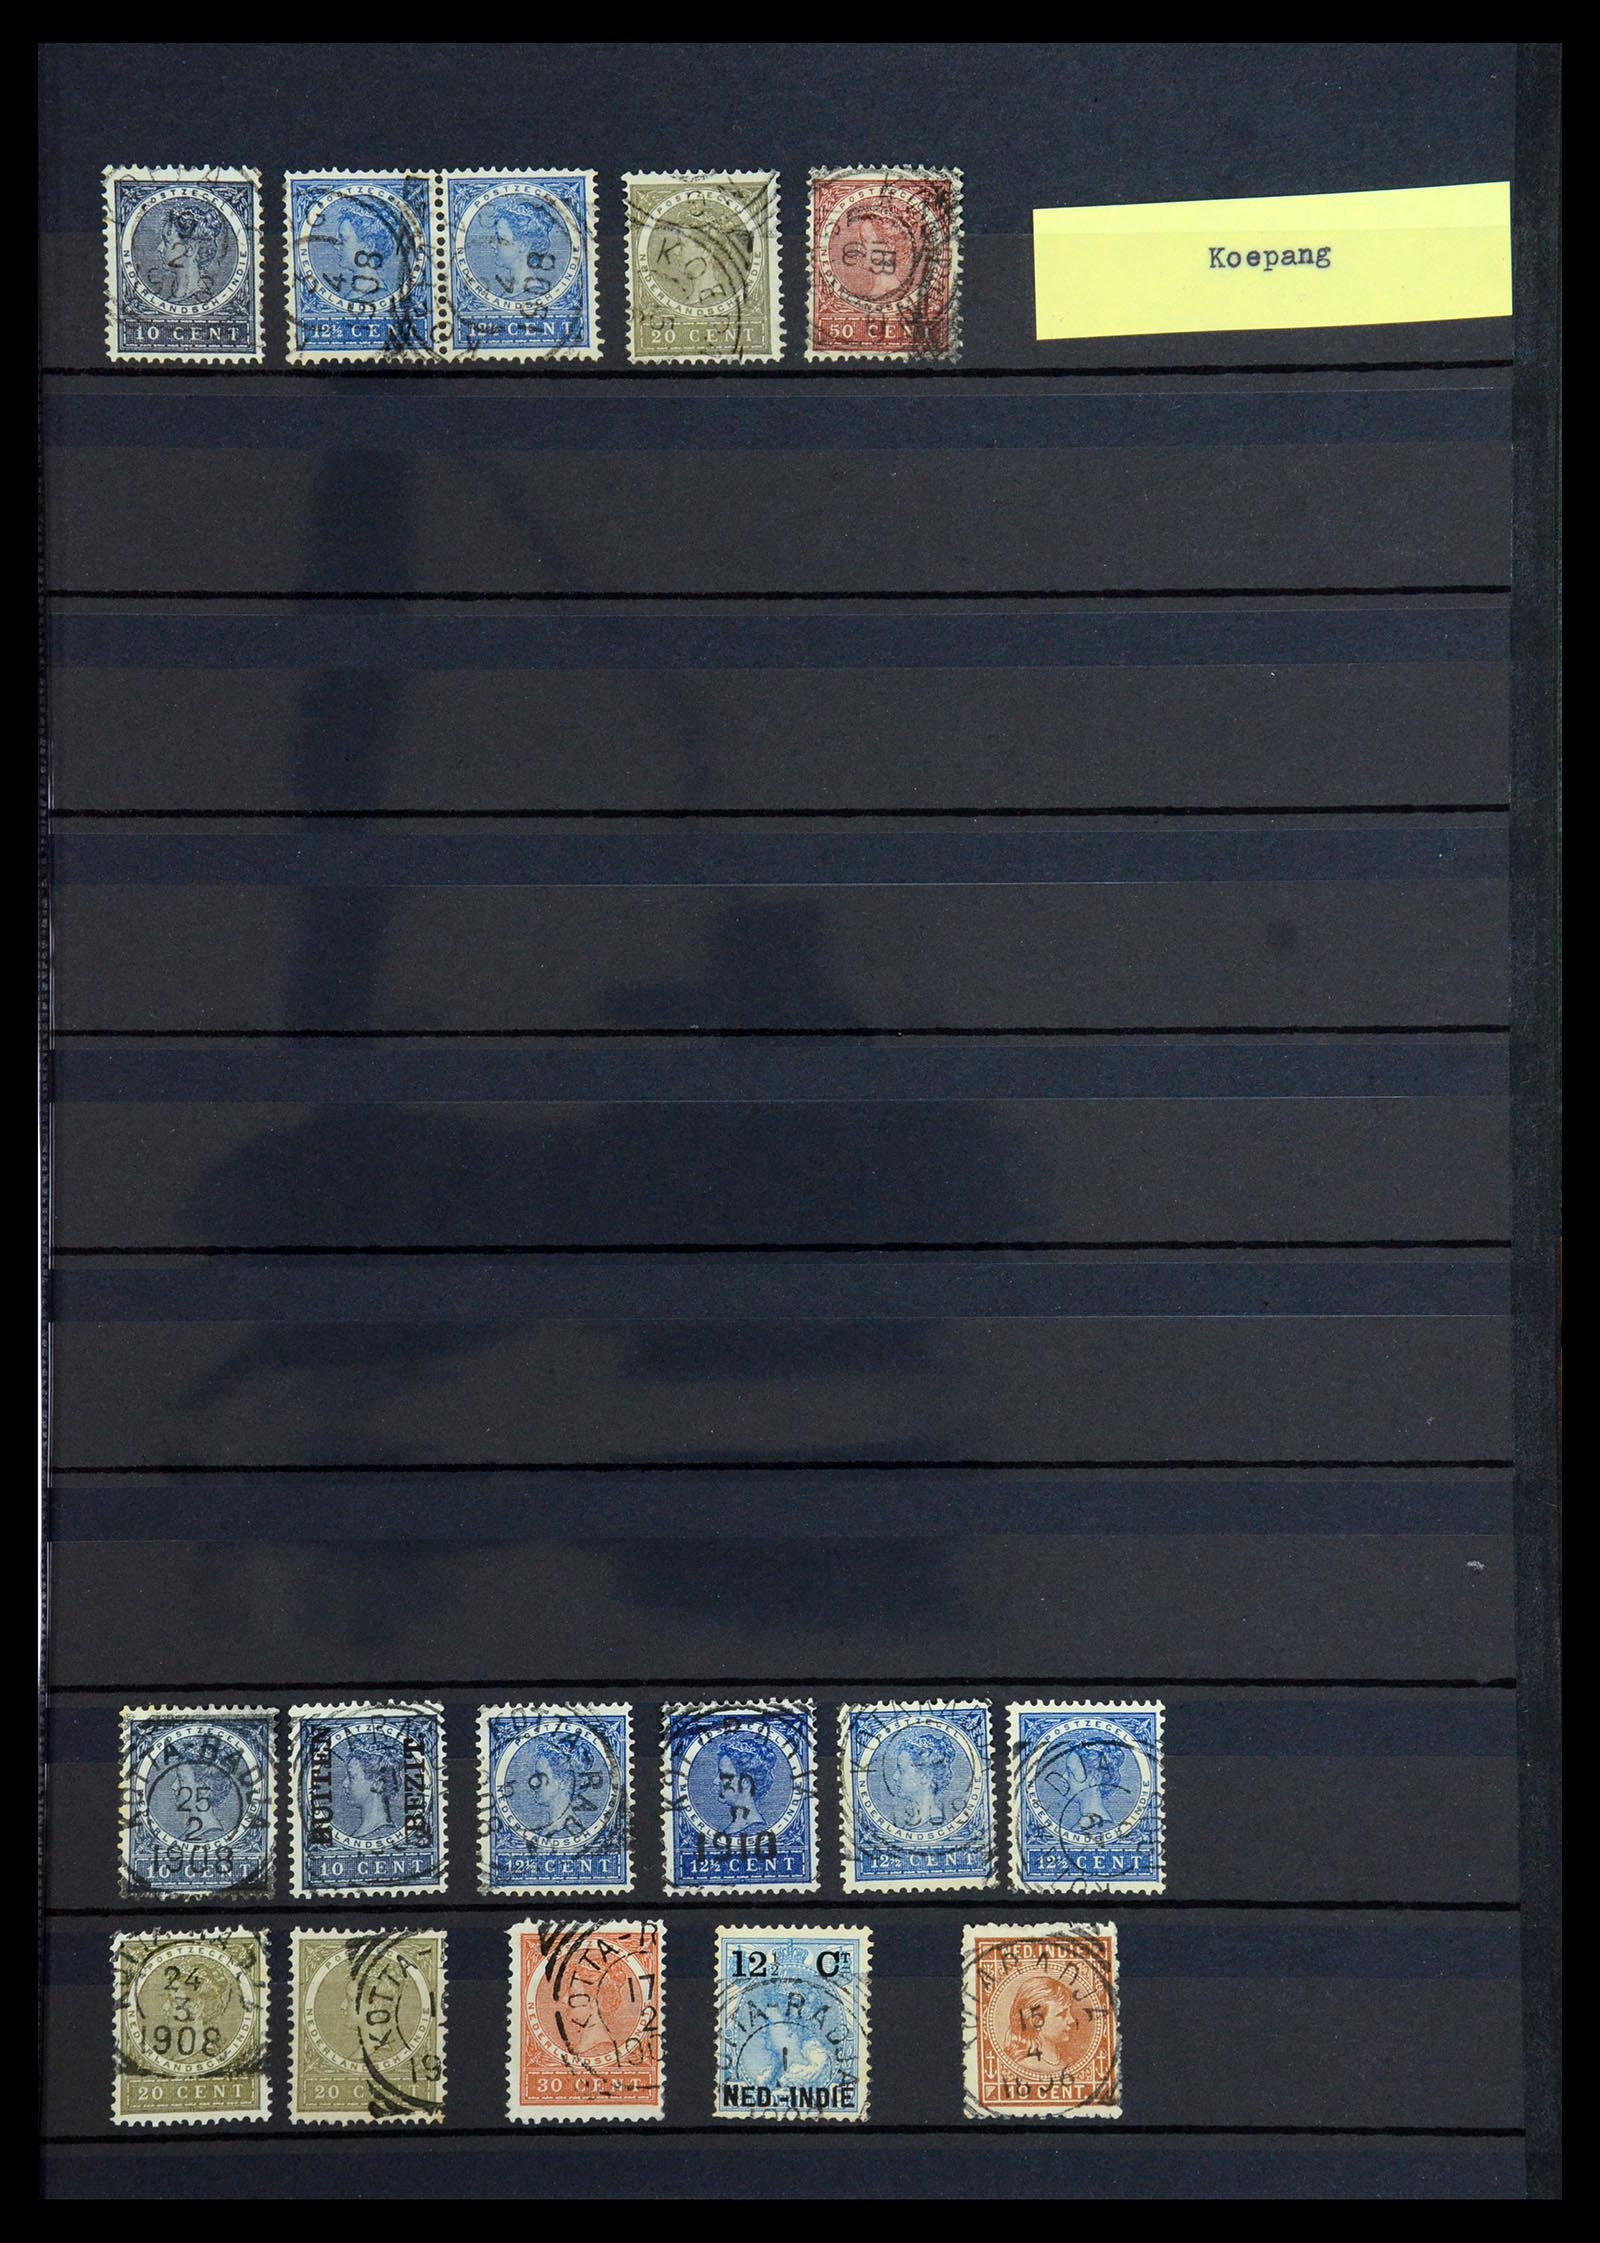 36371 023 - Stamp collection 36371 Dutch east Indies cancels.